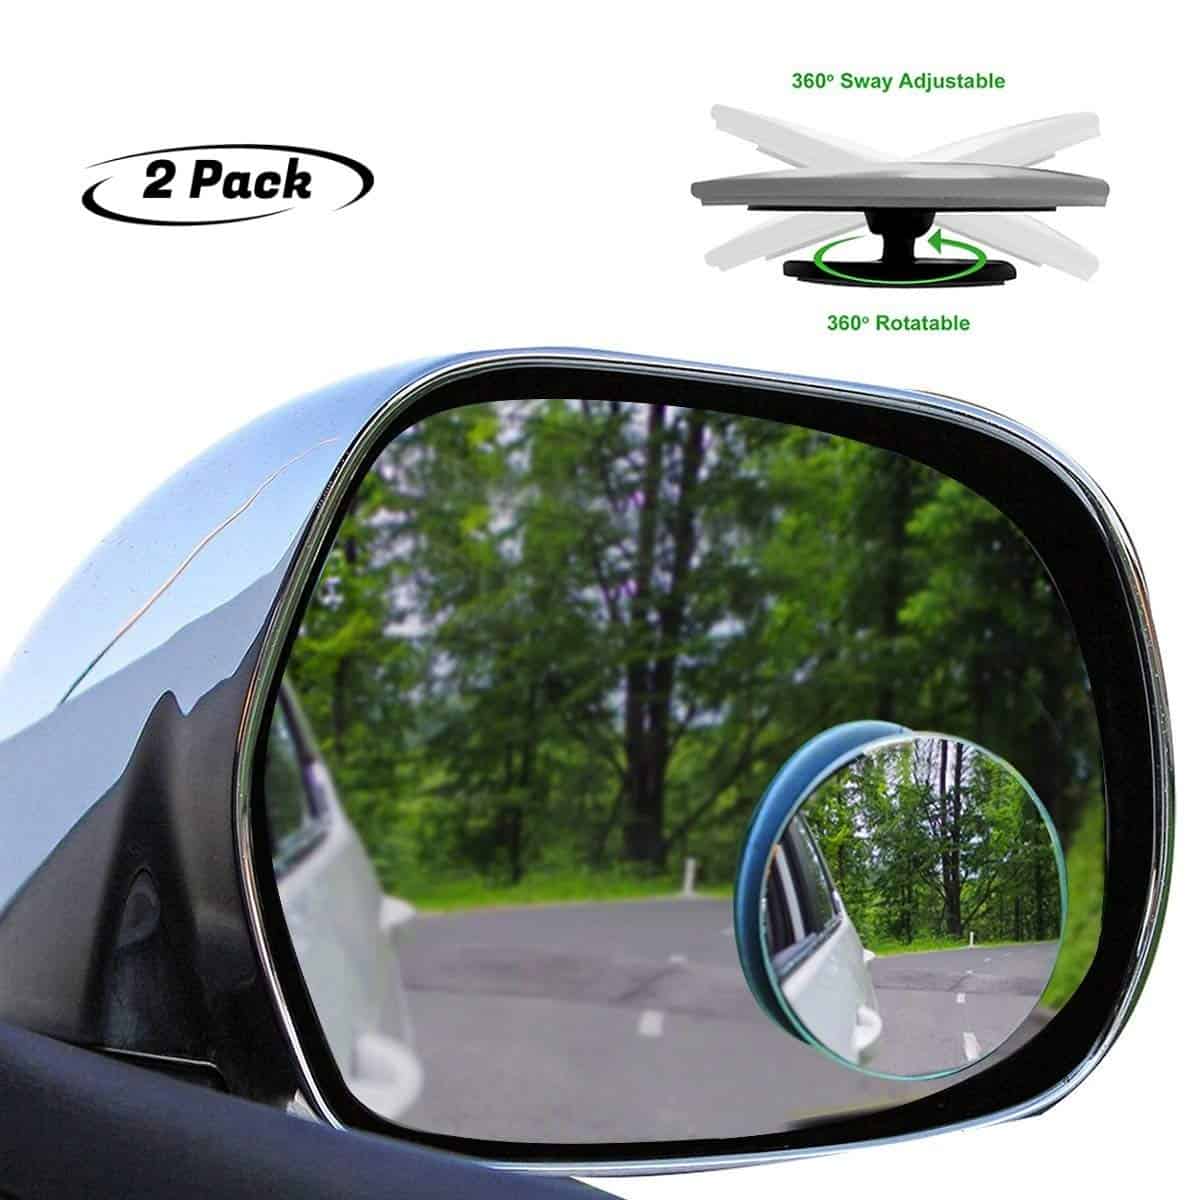 Best Blind Spot Mirrors In 2020 | Autowise